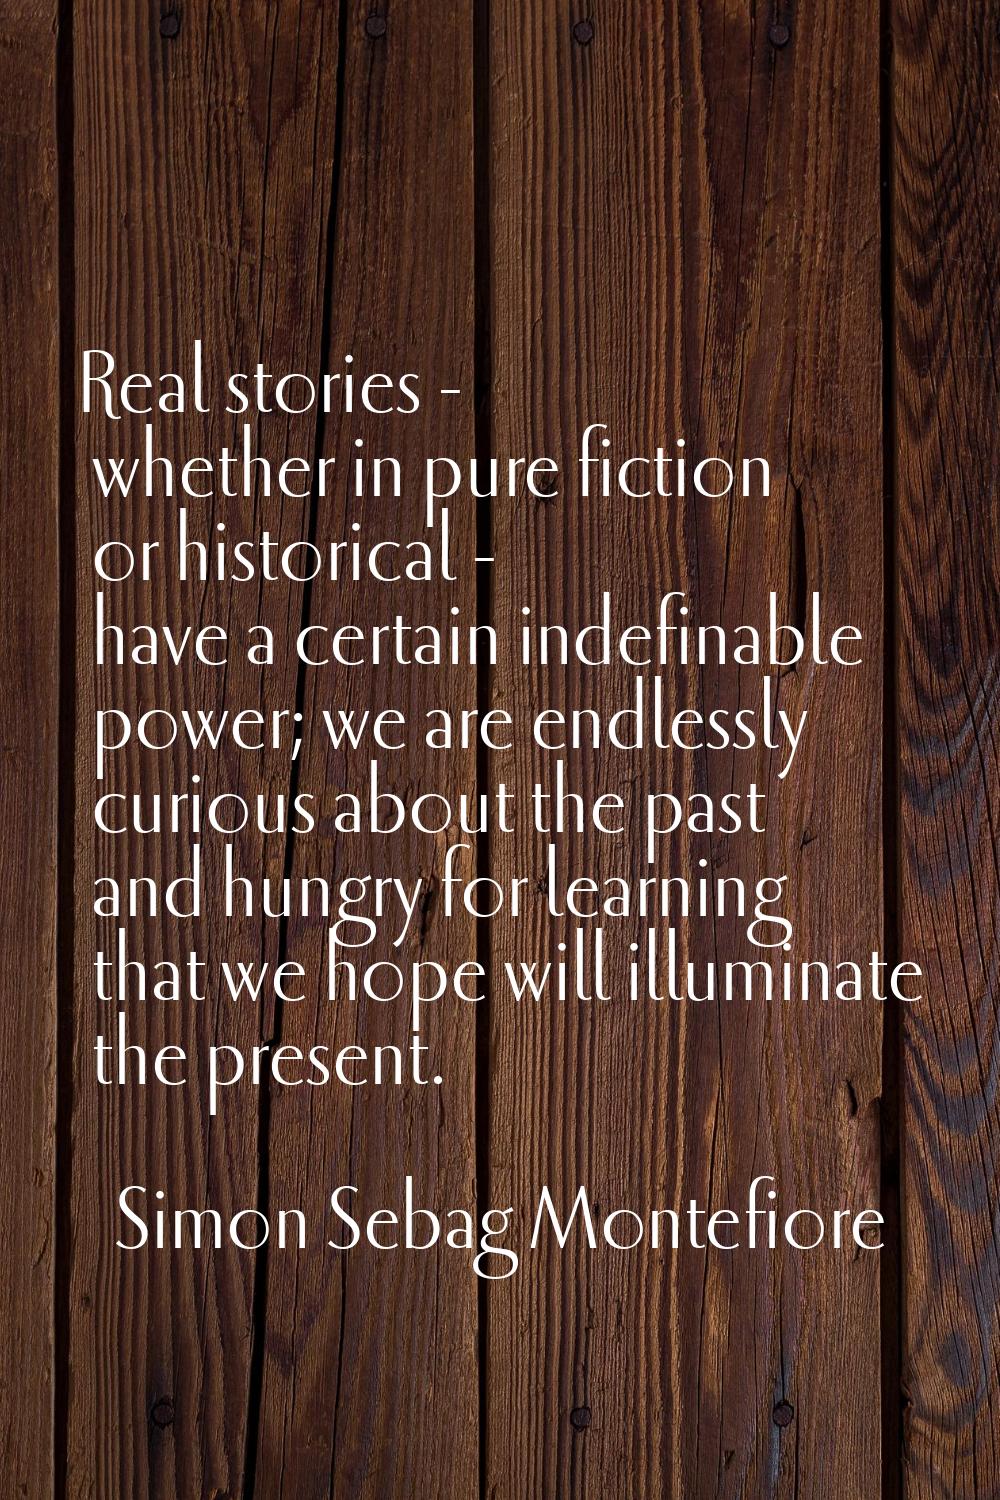 Real stories - whether in pure fiction or historical - have a certain indefinable power; we are end